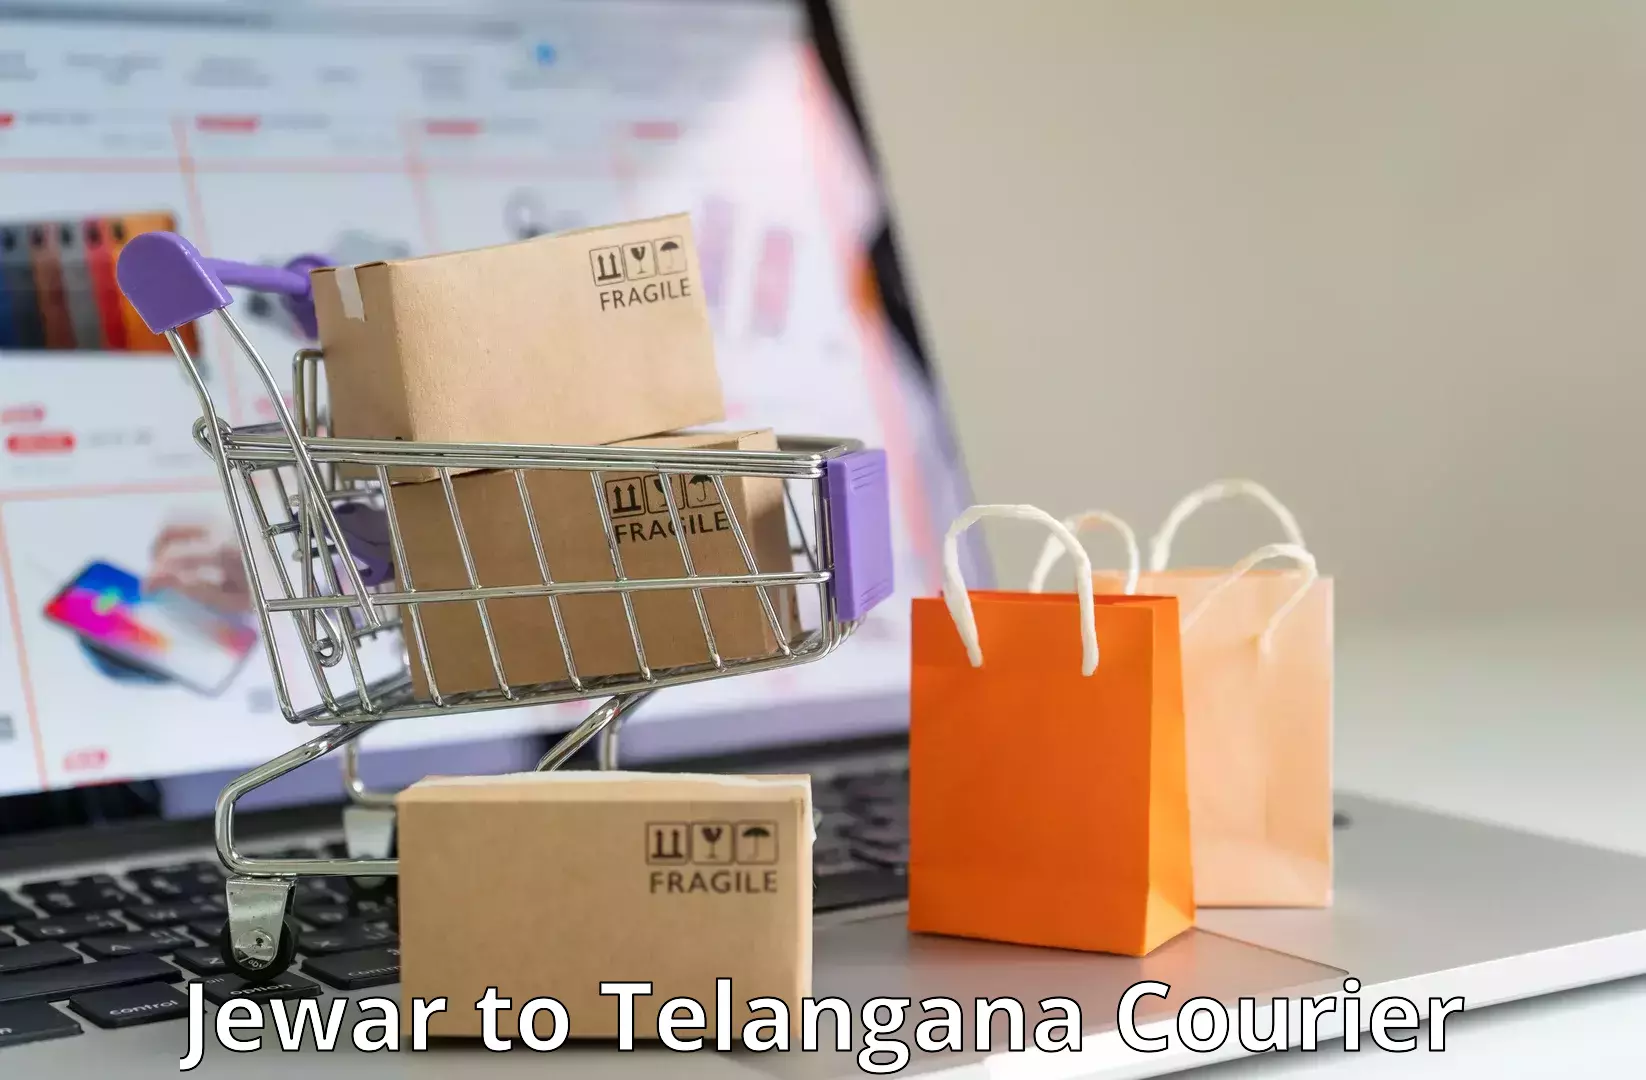 On-call courier service Jewar to Eligedu